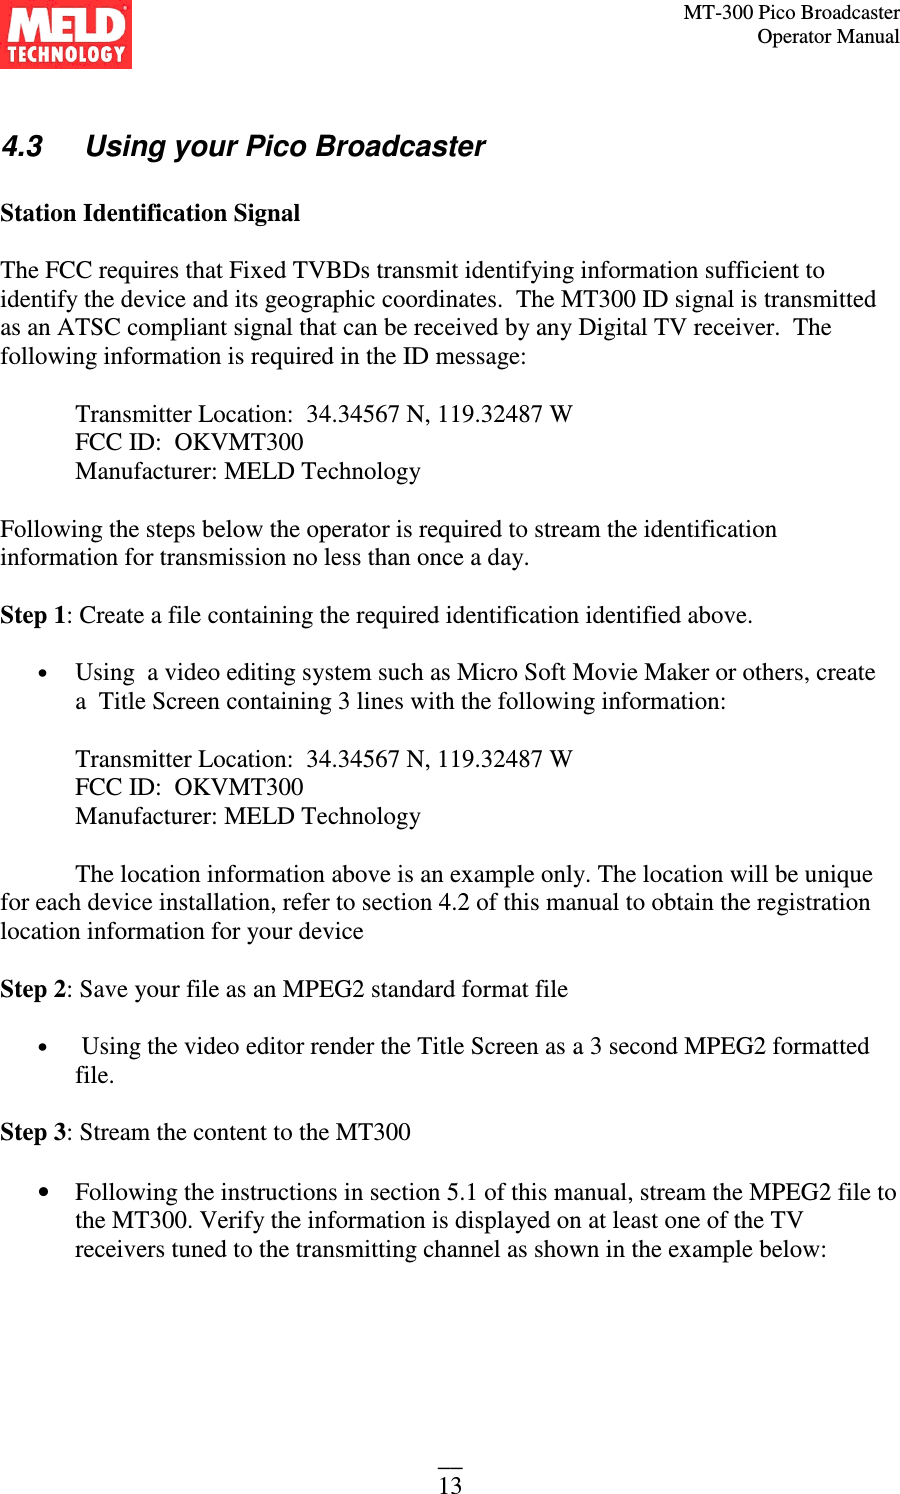 MT-300 Pico Broadcaster                                                                                                                                             Operator Manual __ 13  4.3   Using your Pico Broadcaster  Station Identification Signal  The FCC requires that Fixed TVBDs transmit identifying information sufficient to identify the device and its geographic coordinates.  The MT300 ID signal is transmitted as an ATSC compliant signal that can be received by any Digital TV receiver.  The following information is required in the ID message:    Transmitter Location:  34.34567 N, 119.32487 W FCC ID:  OKVMT300 Manufacturer: MELD Technology    Following the steps below the operator is required to stream the identification information for transmission no less than once a day.  Step 1: Create a file containing the required identification identified above.  • Using  a video editing system such as Micro Soft Movie Maker or others, create a  Title Screen containing 3 lines with the following information:  Transmitter Location:  34.34567 N, 119.32487 W  FCC ID:  OKVMT300  Manufacturer: MELD Technology      The location information above is an example only. The location will be unique for each device installation, refer to section 4.2 of this manual to obtain the registration location information for your device  Step 2: Save your file as an MPEG2 standard format file  •  Using the video editor render the Title Screen as a 3 second MPEG2 formatted file.  Step 3: Stream the content to the MT300  • Following the instructions in section 5.1 of this manual, stream the MPEG2 file to the MT300. Verify the information is displayed on at least one of the TV receivers tuned to the transmitting channel as shown in the example below:  